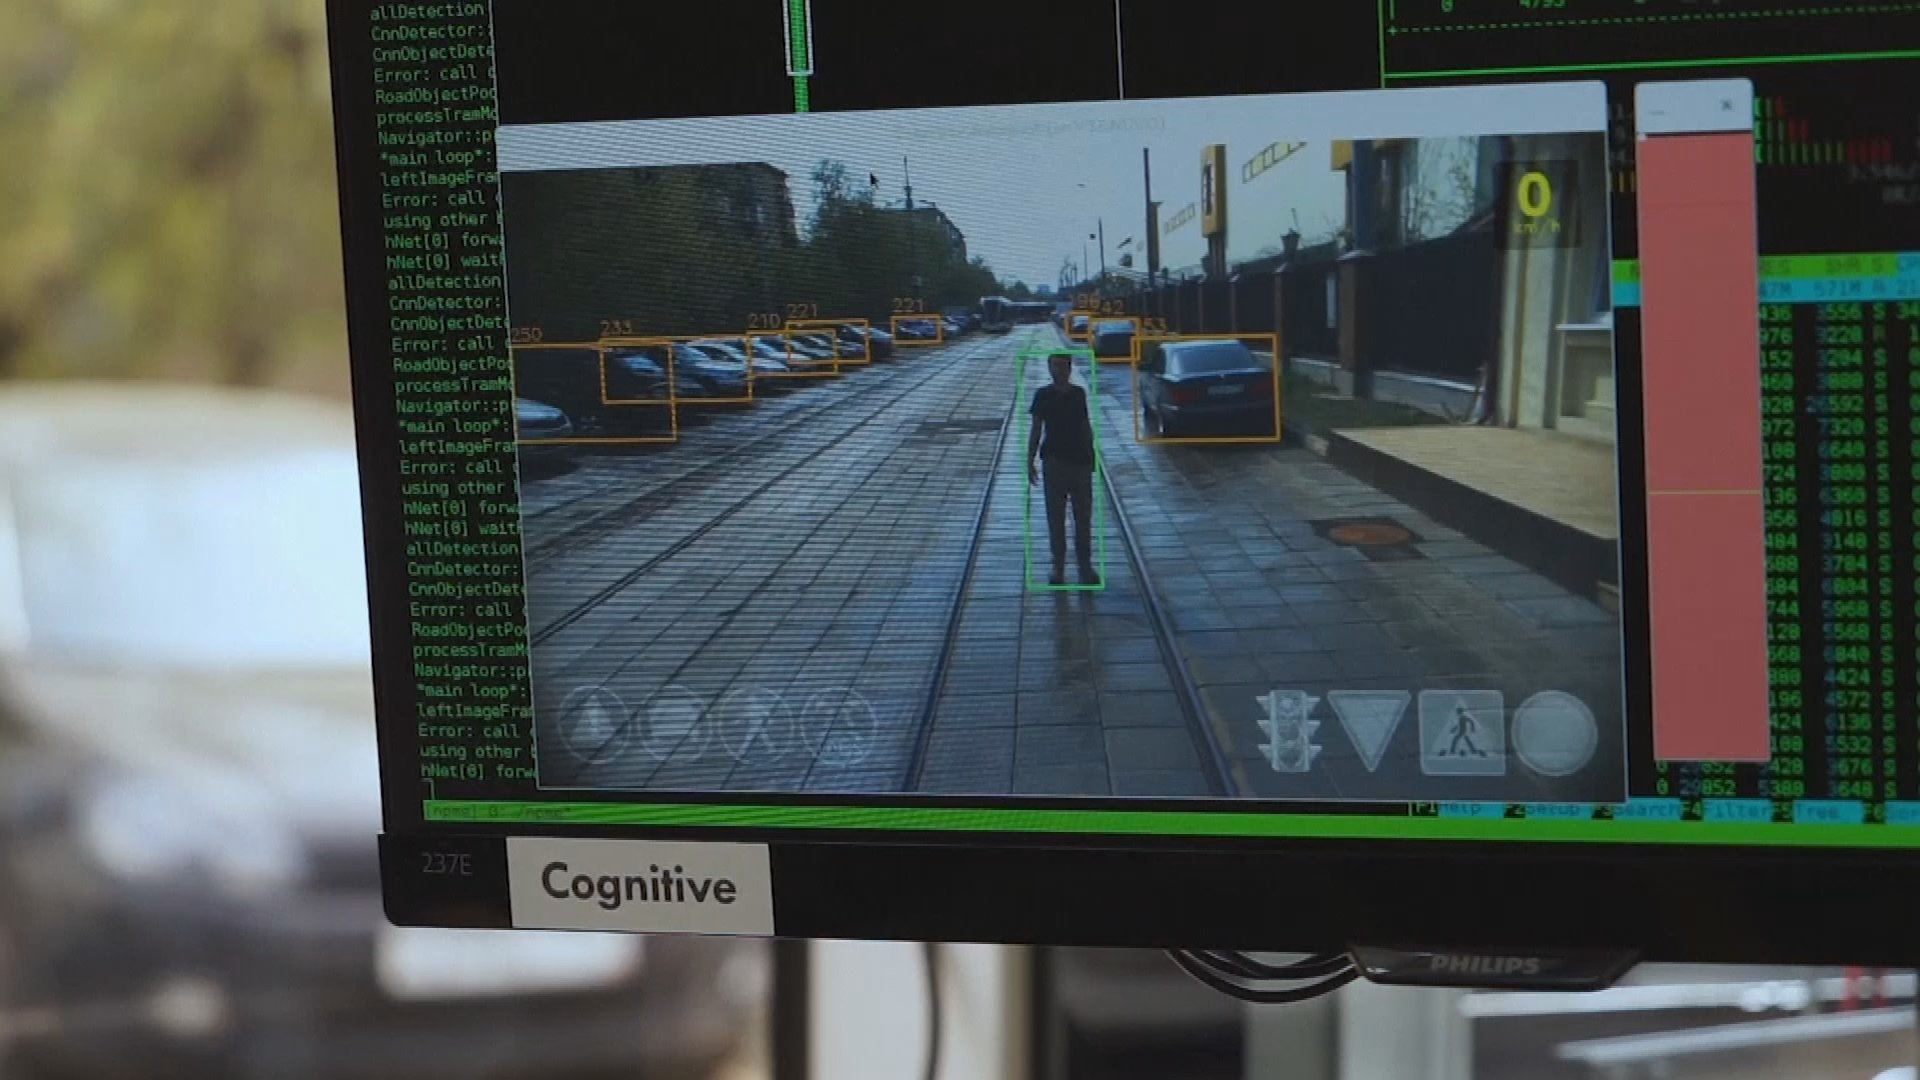 Camera and computer vision of tram showing obstacle